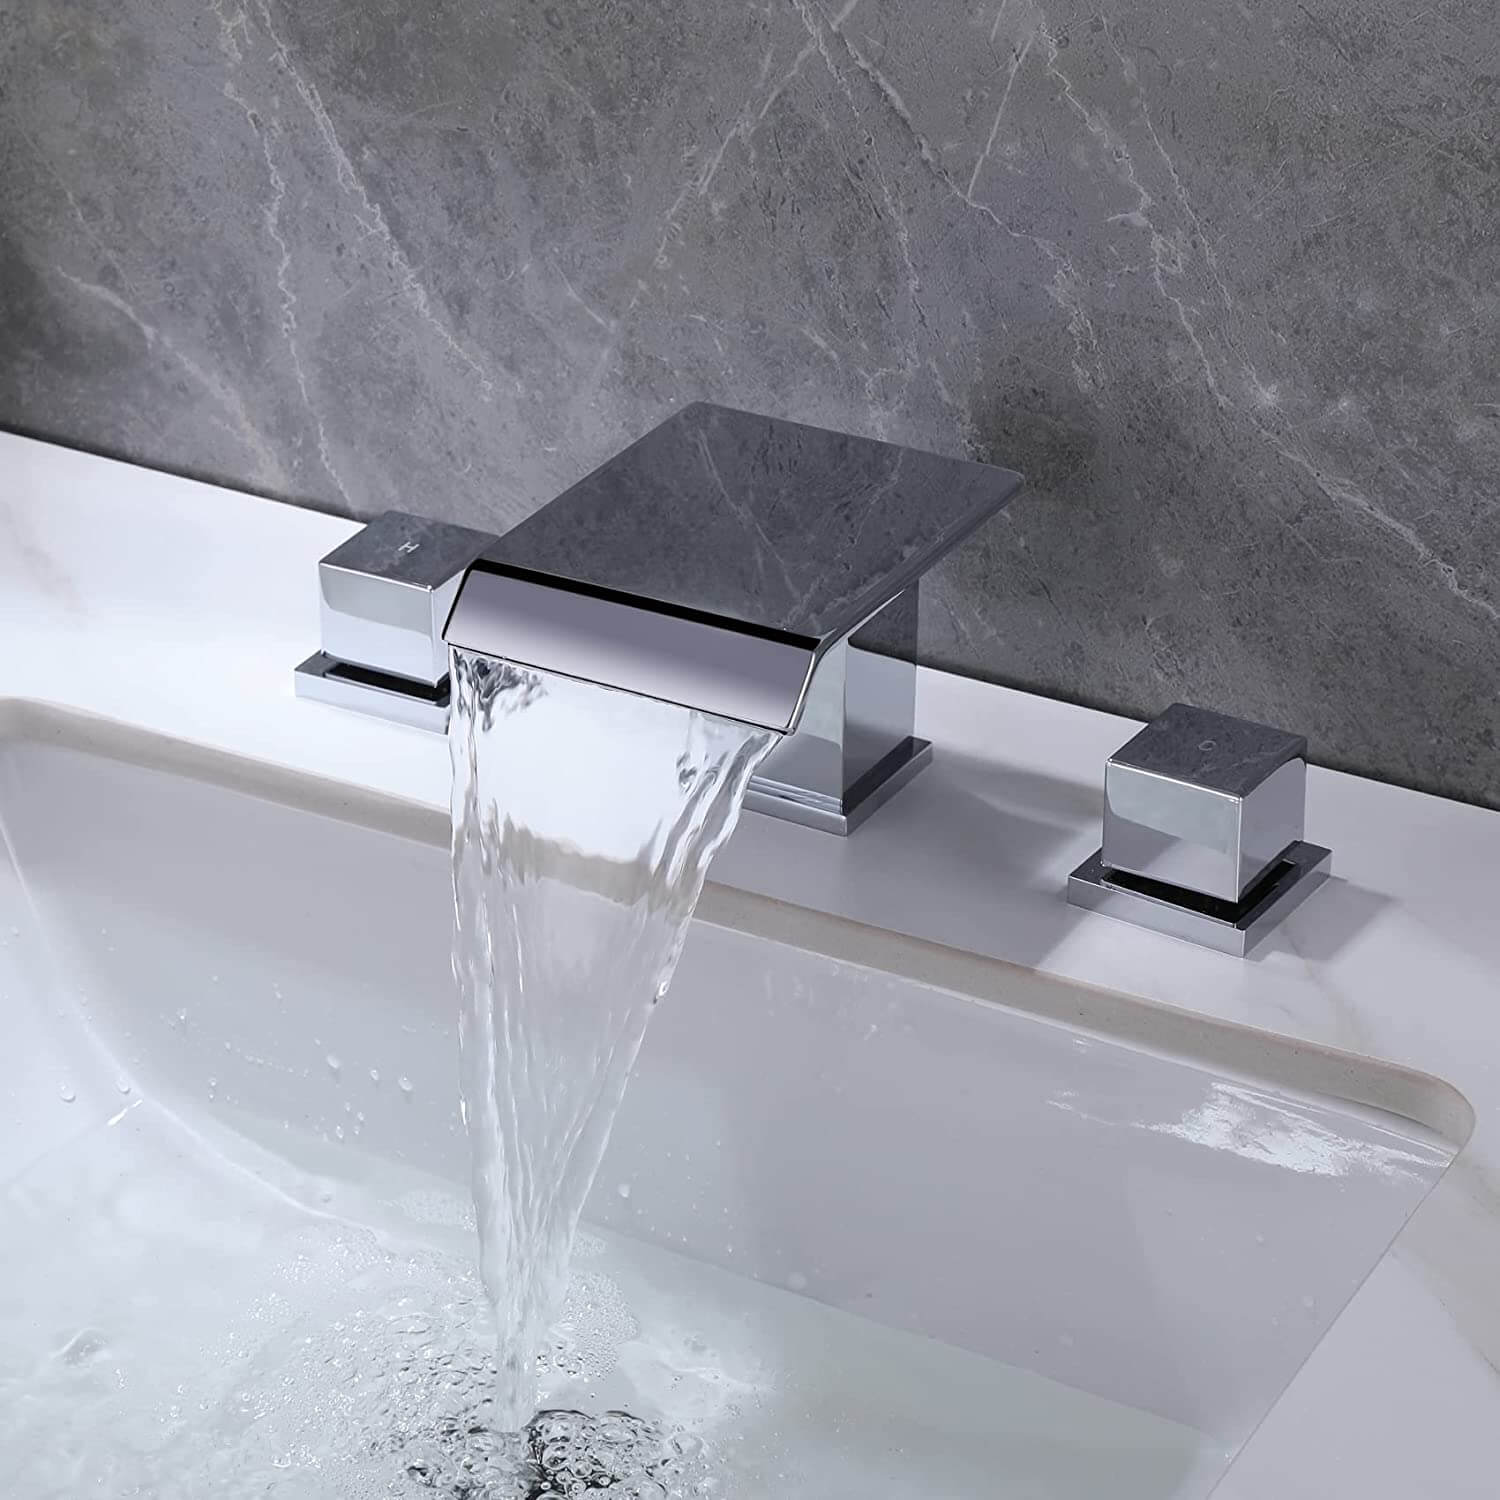 wowow modern waterfall 3 hole widespread bathroom sink faucet square handle chrome finish